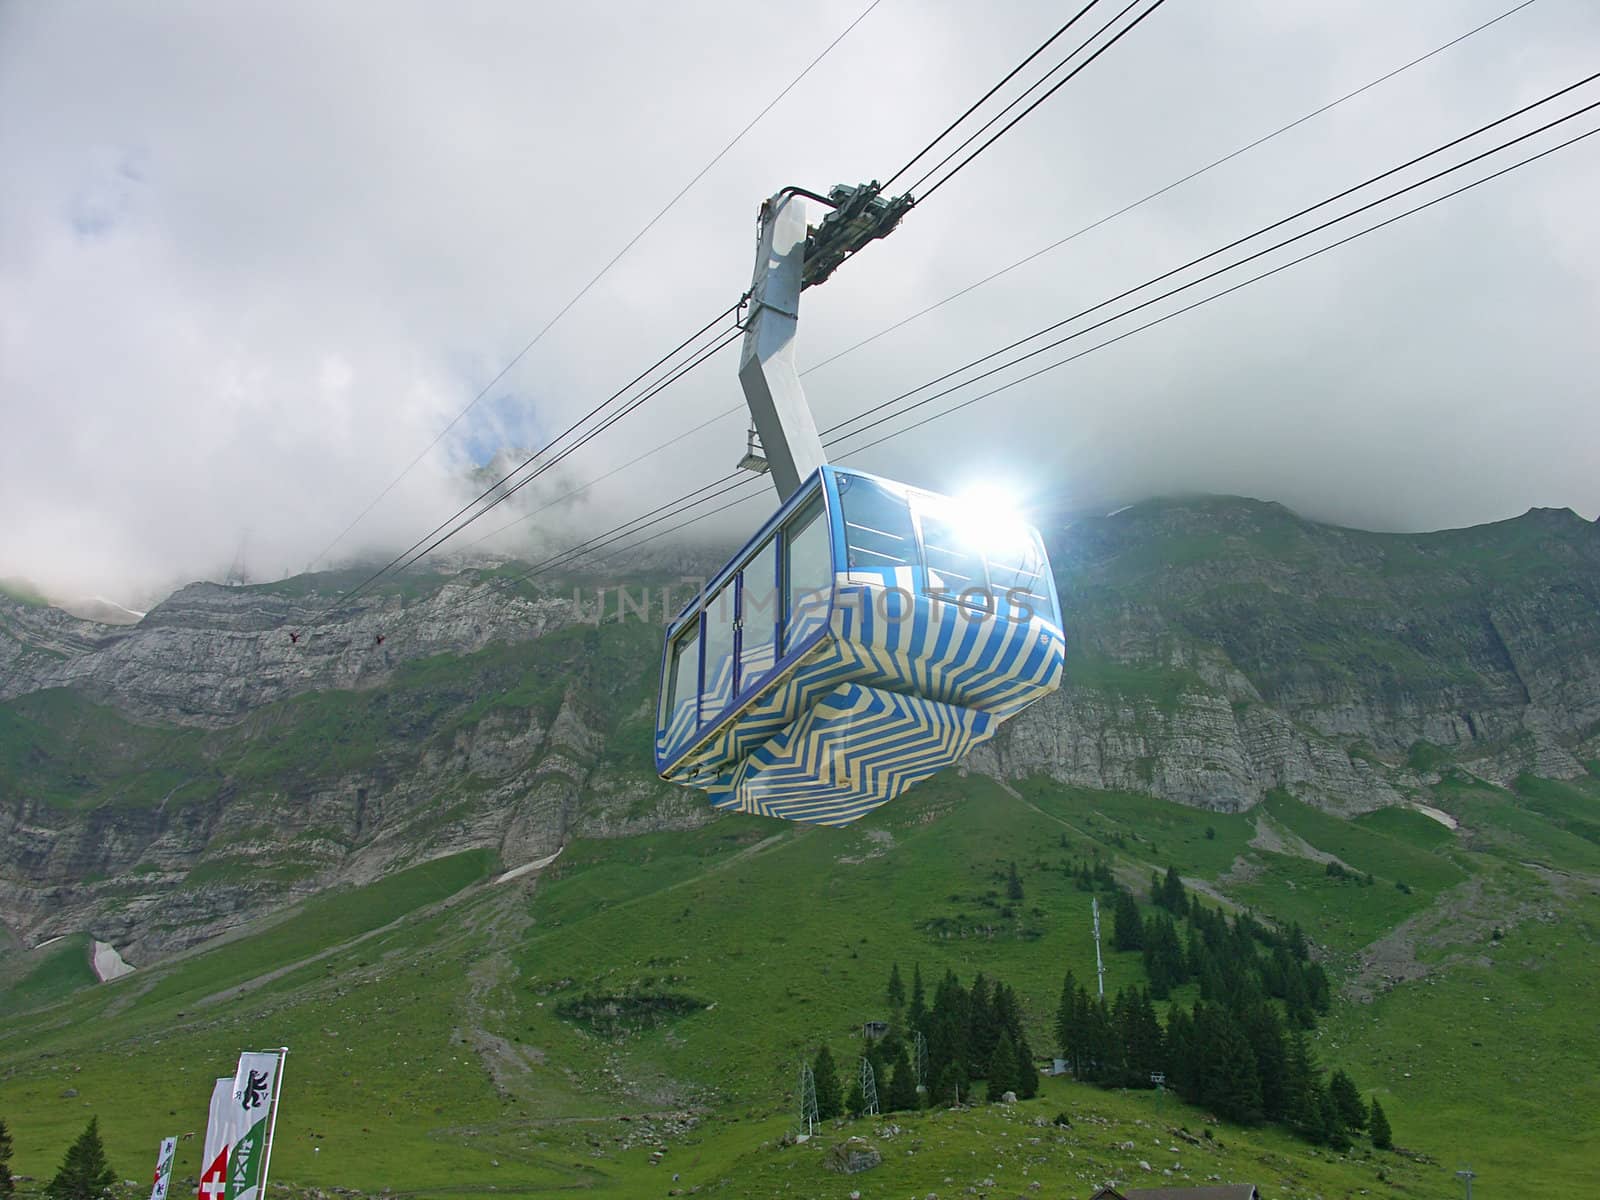 The cable car rises in mountains